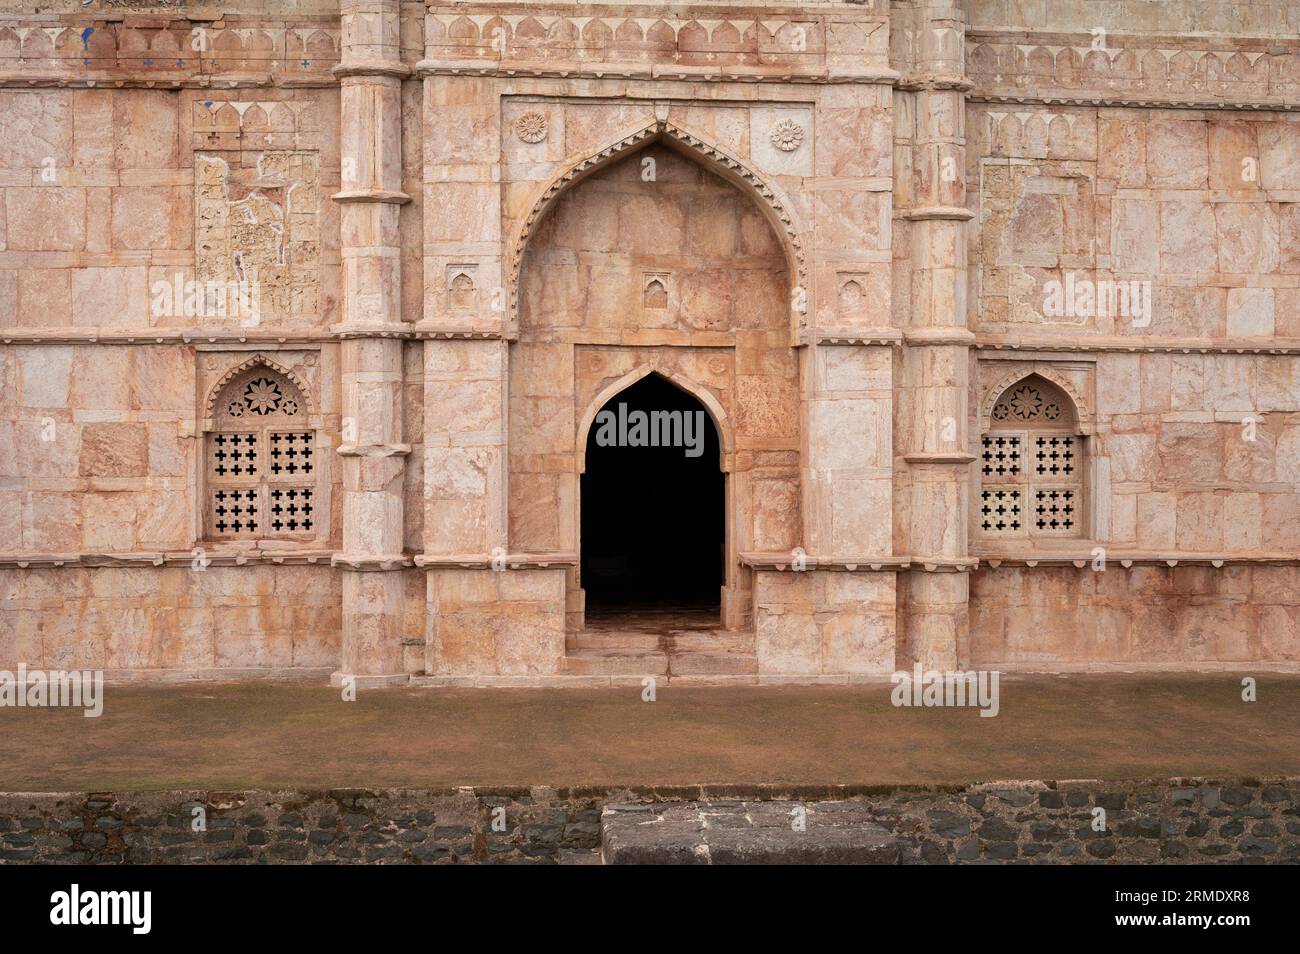 Carving details on the outer wall of Darya Khan's Tomb, located in Mandu, Madhya Pradesh, India Stock Photo